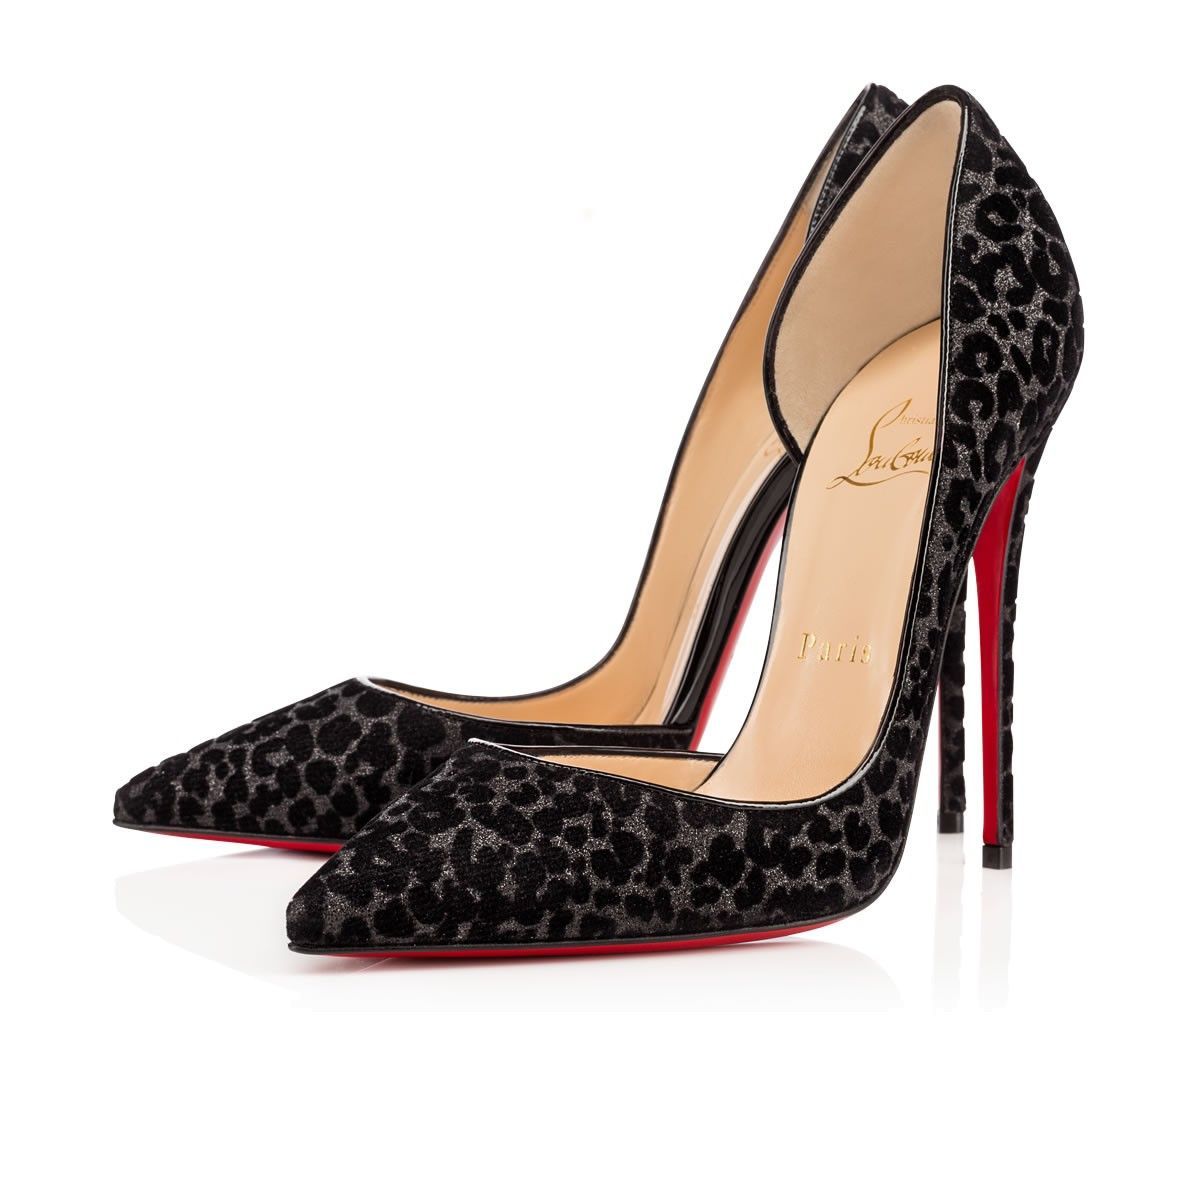 #Christian #Louboutin #Outlet The Best Suit You